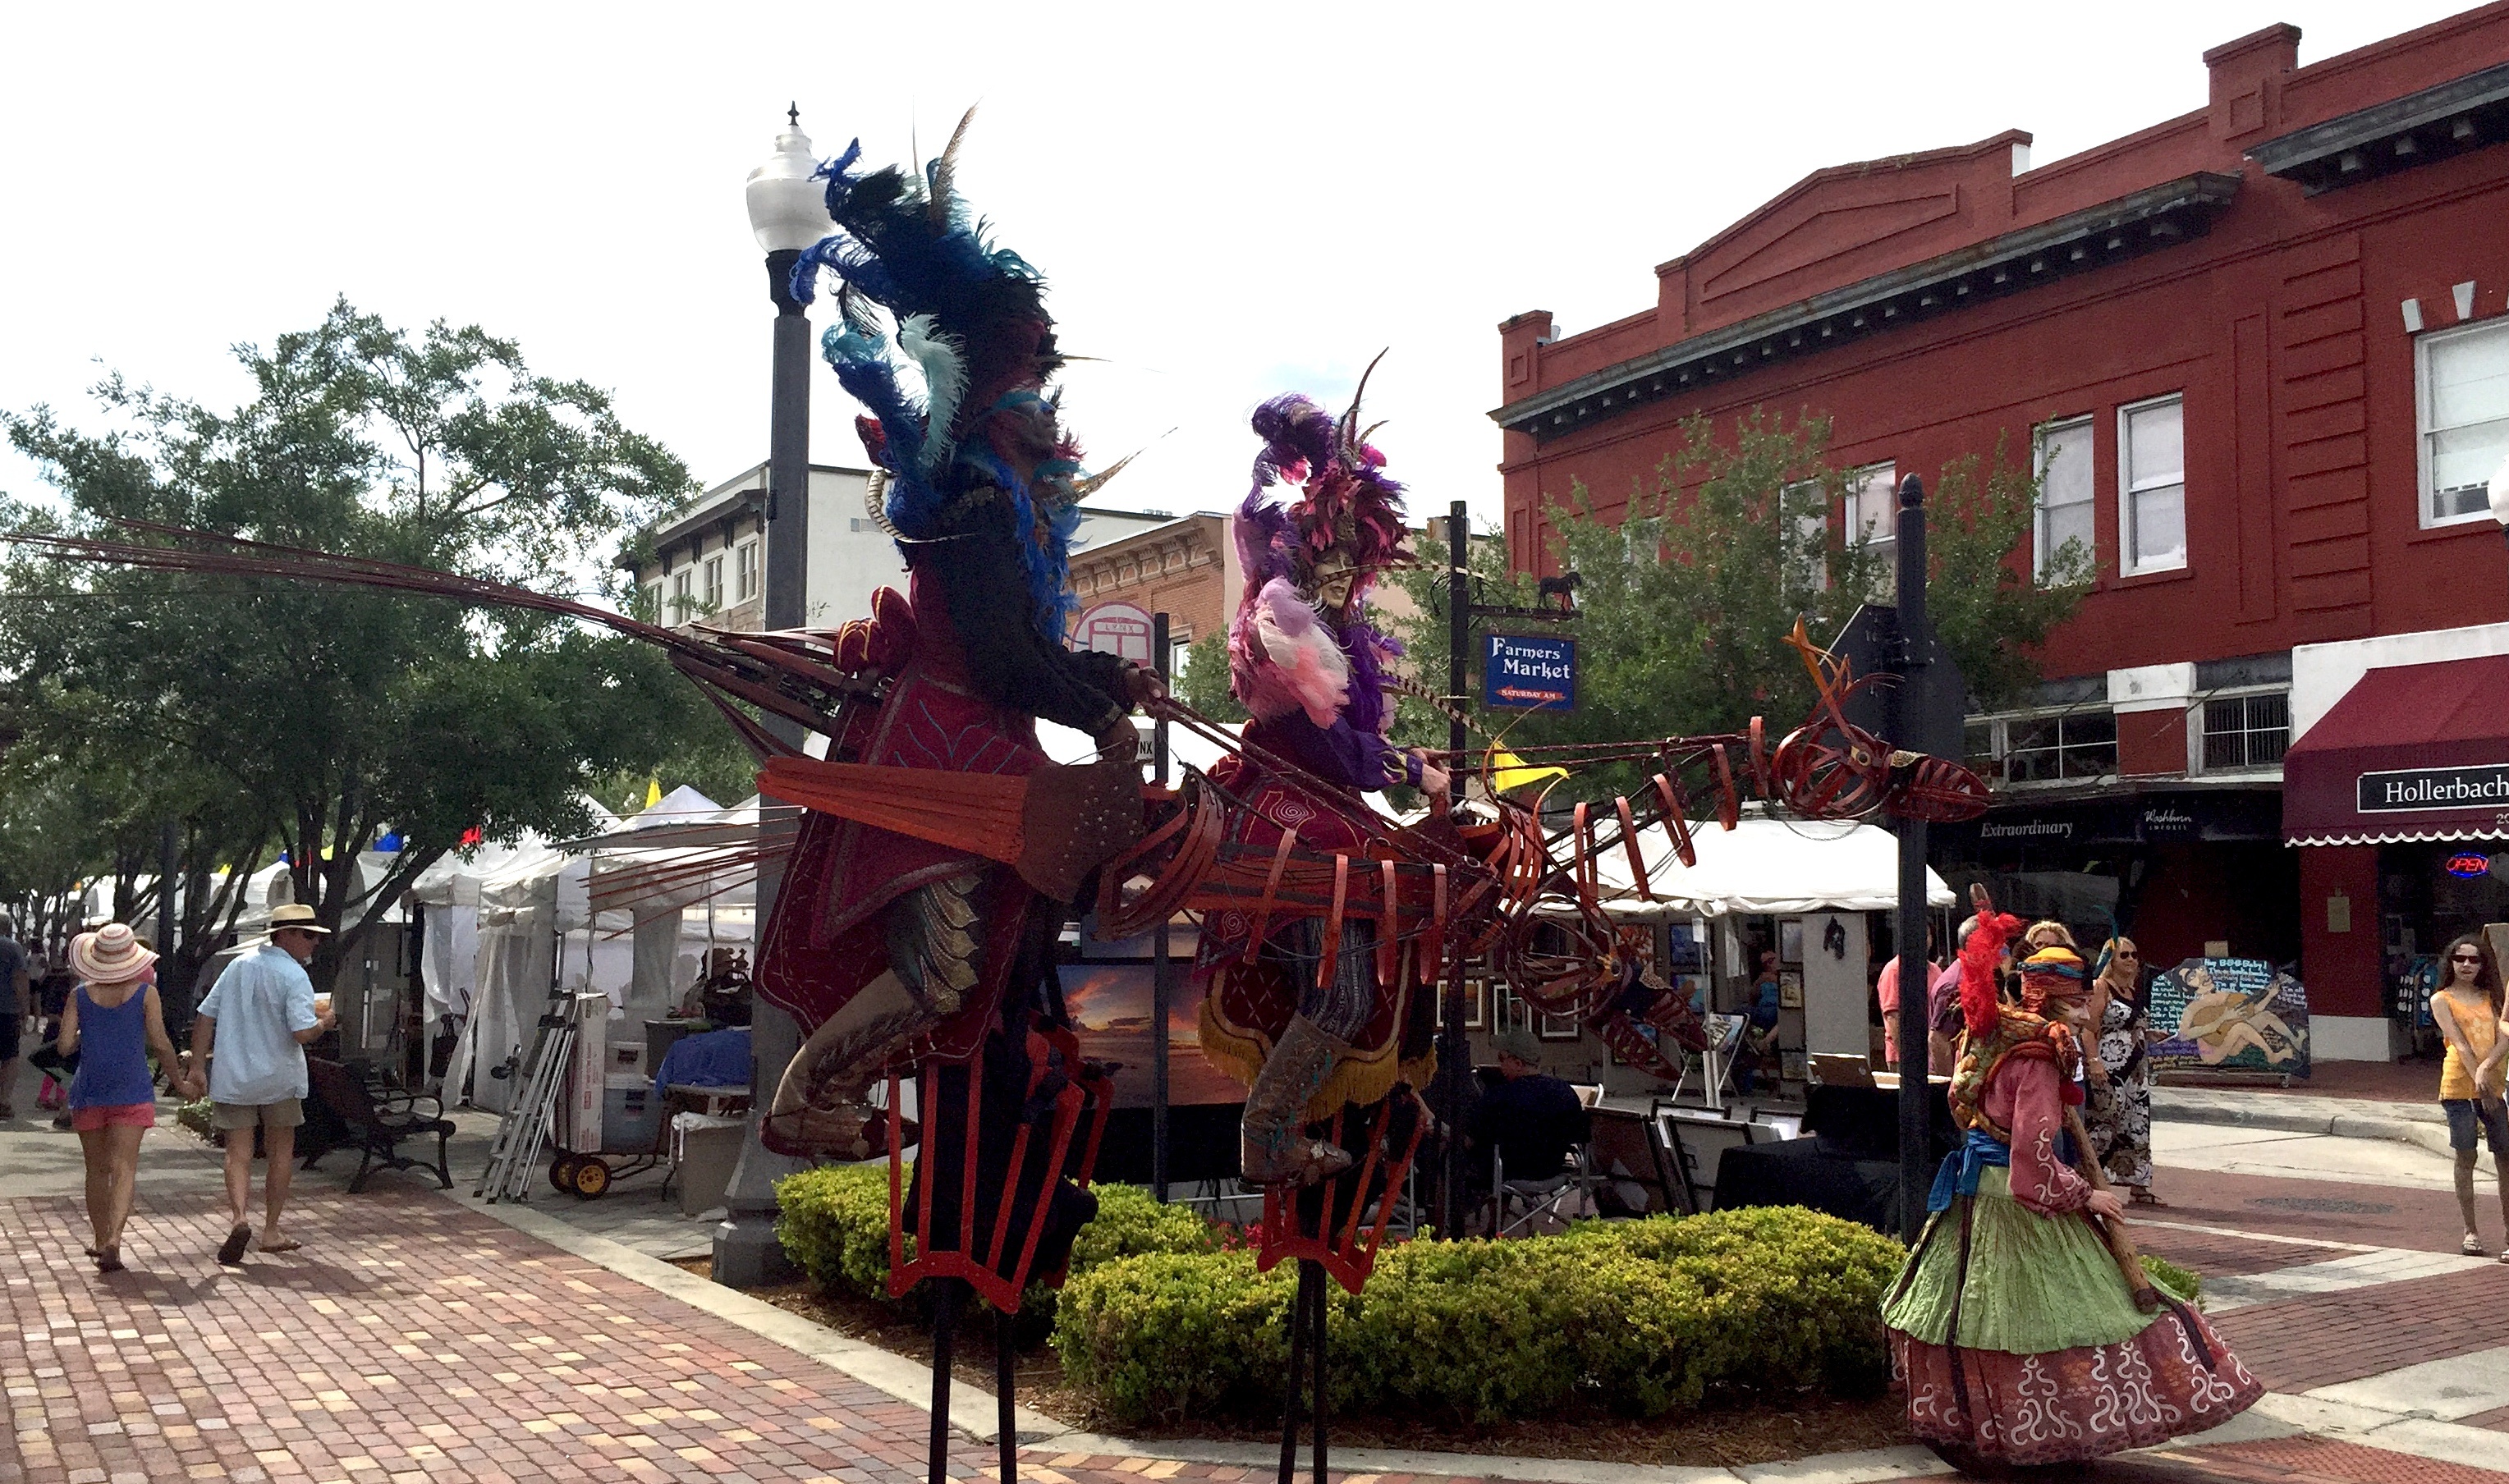 Why Visit the Annual St. Johns River Festival of the Arts in Sanford, FL